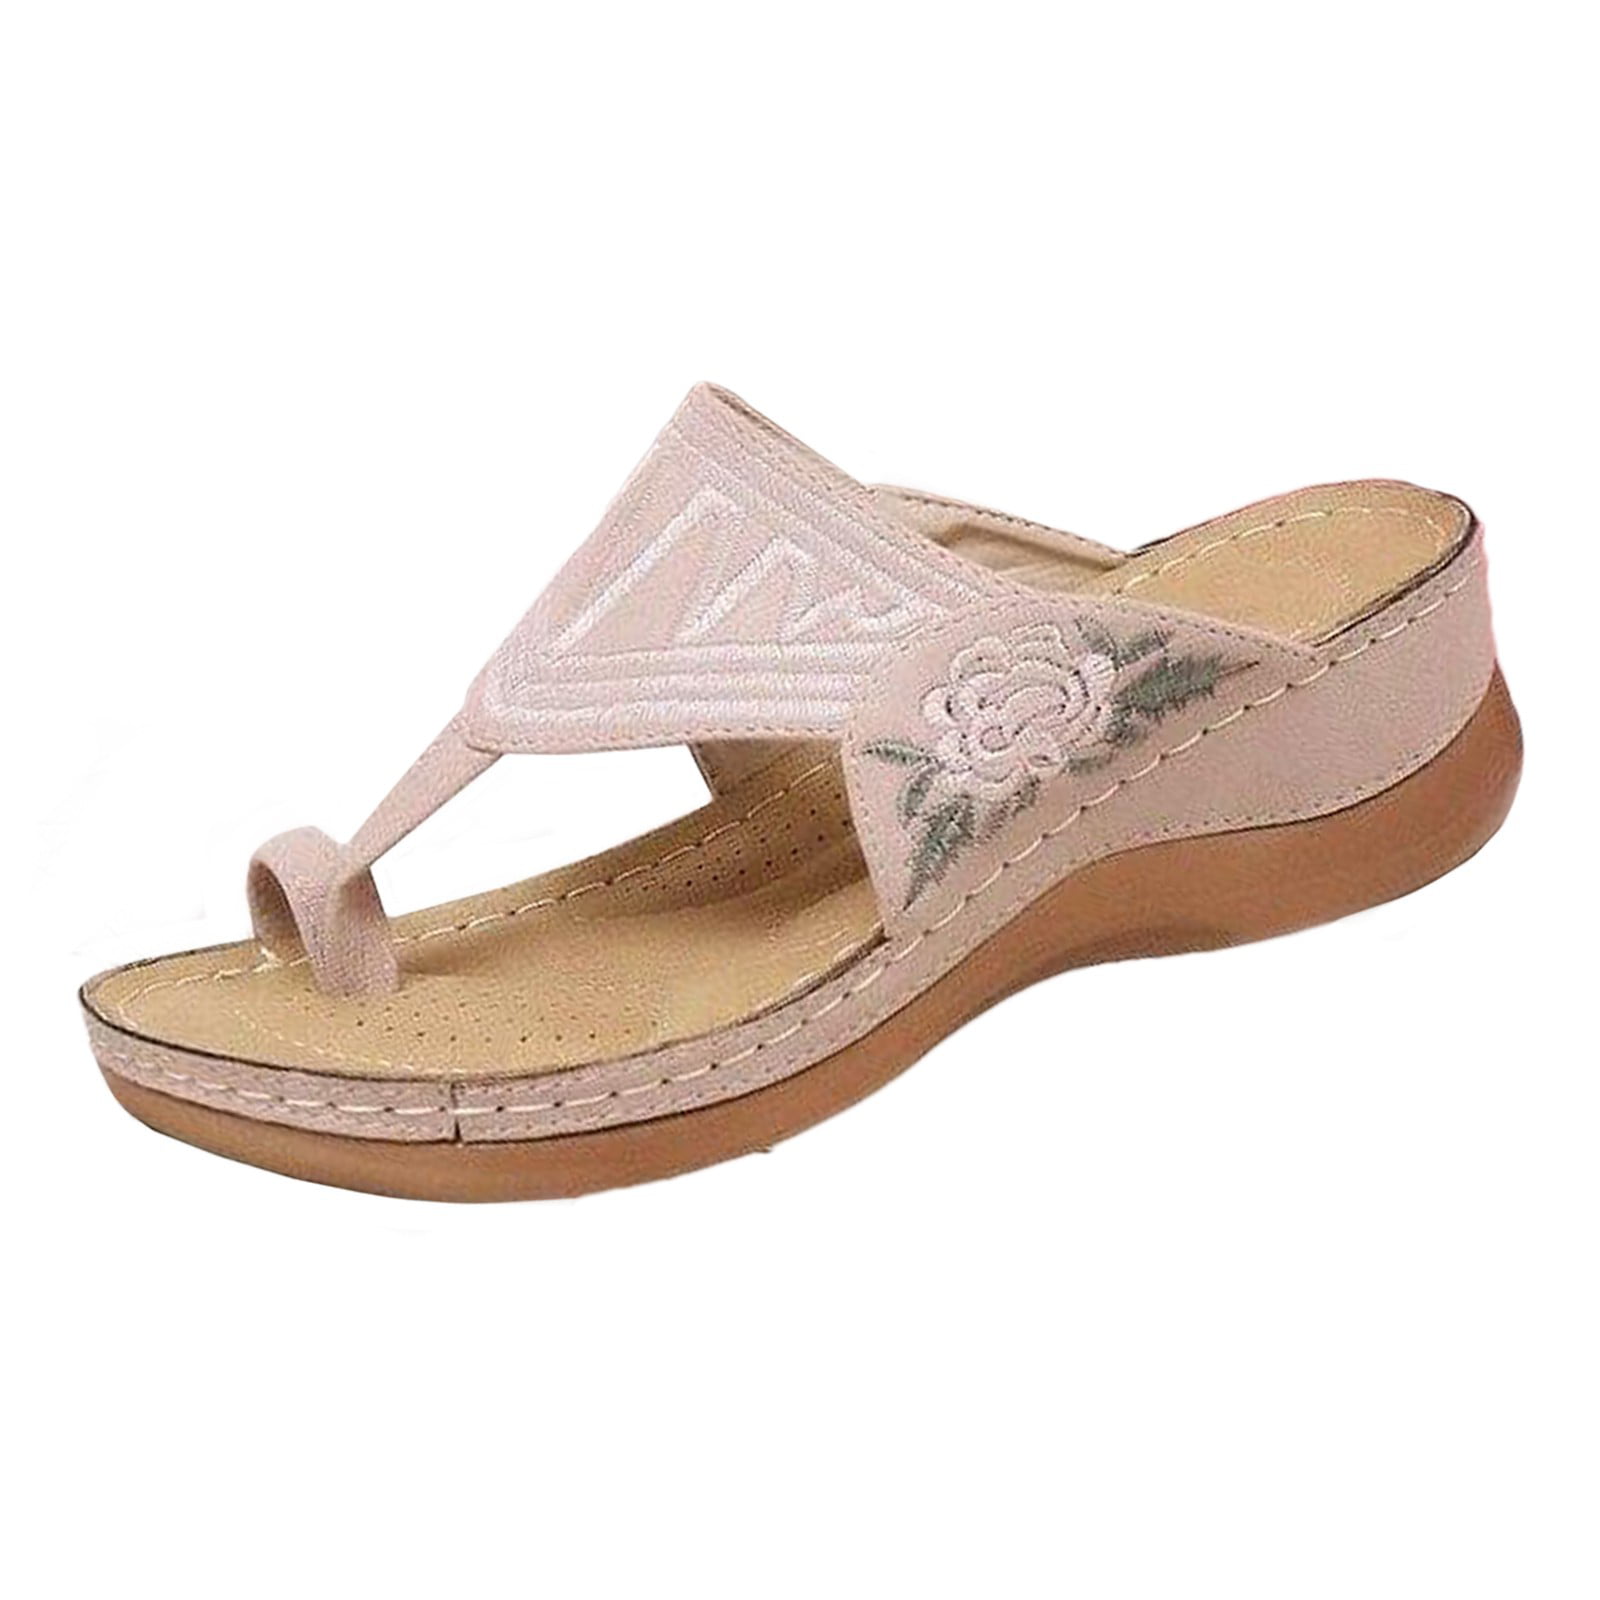 Womens Adjustable Buckle Embroidery Flat Strappy Sandals Shoes